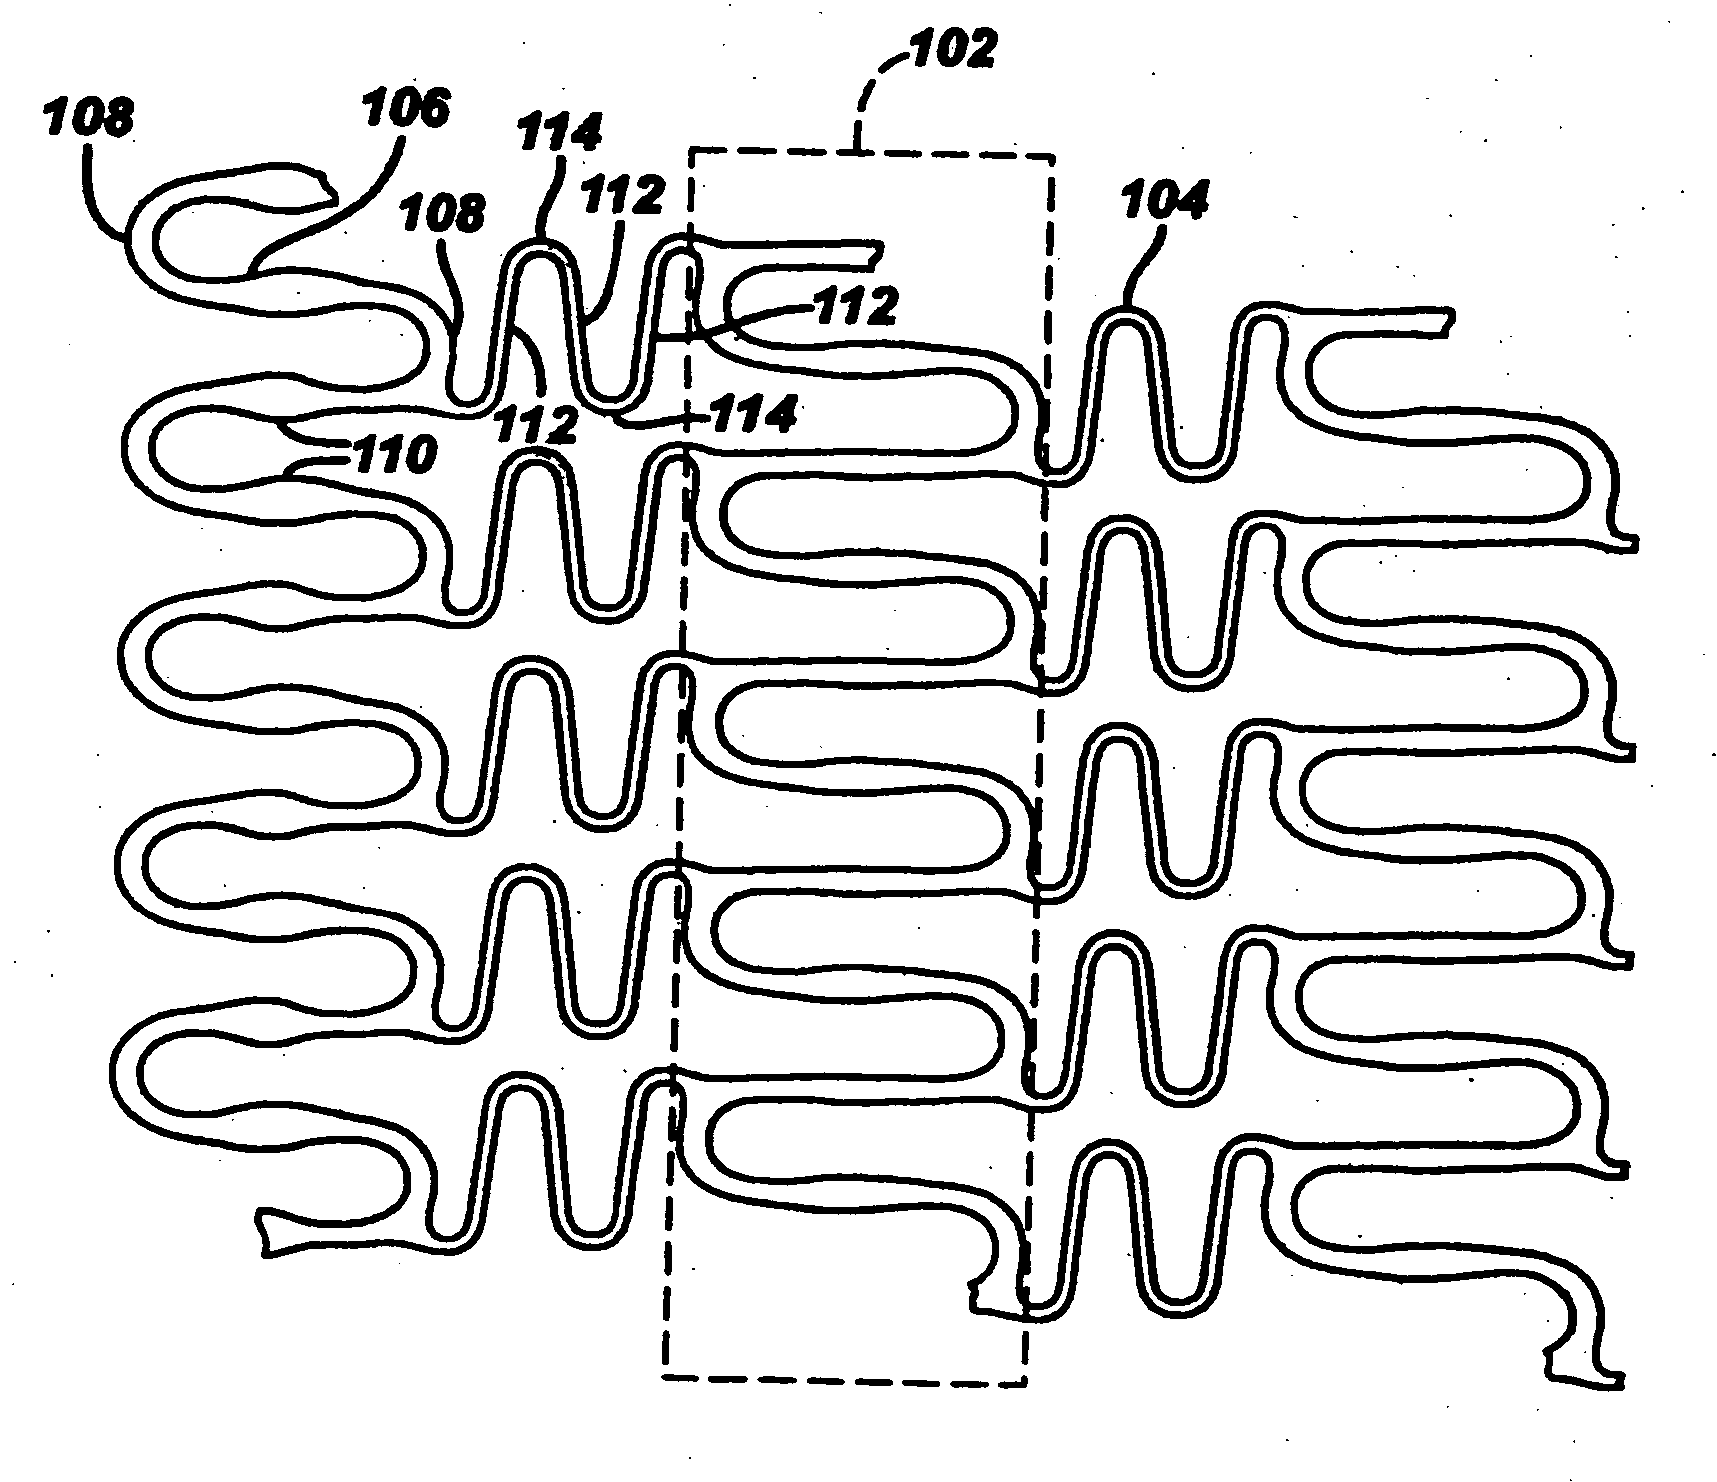 Absorbable stent comprising coating for controlling degradation and maintaining pH neutrality